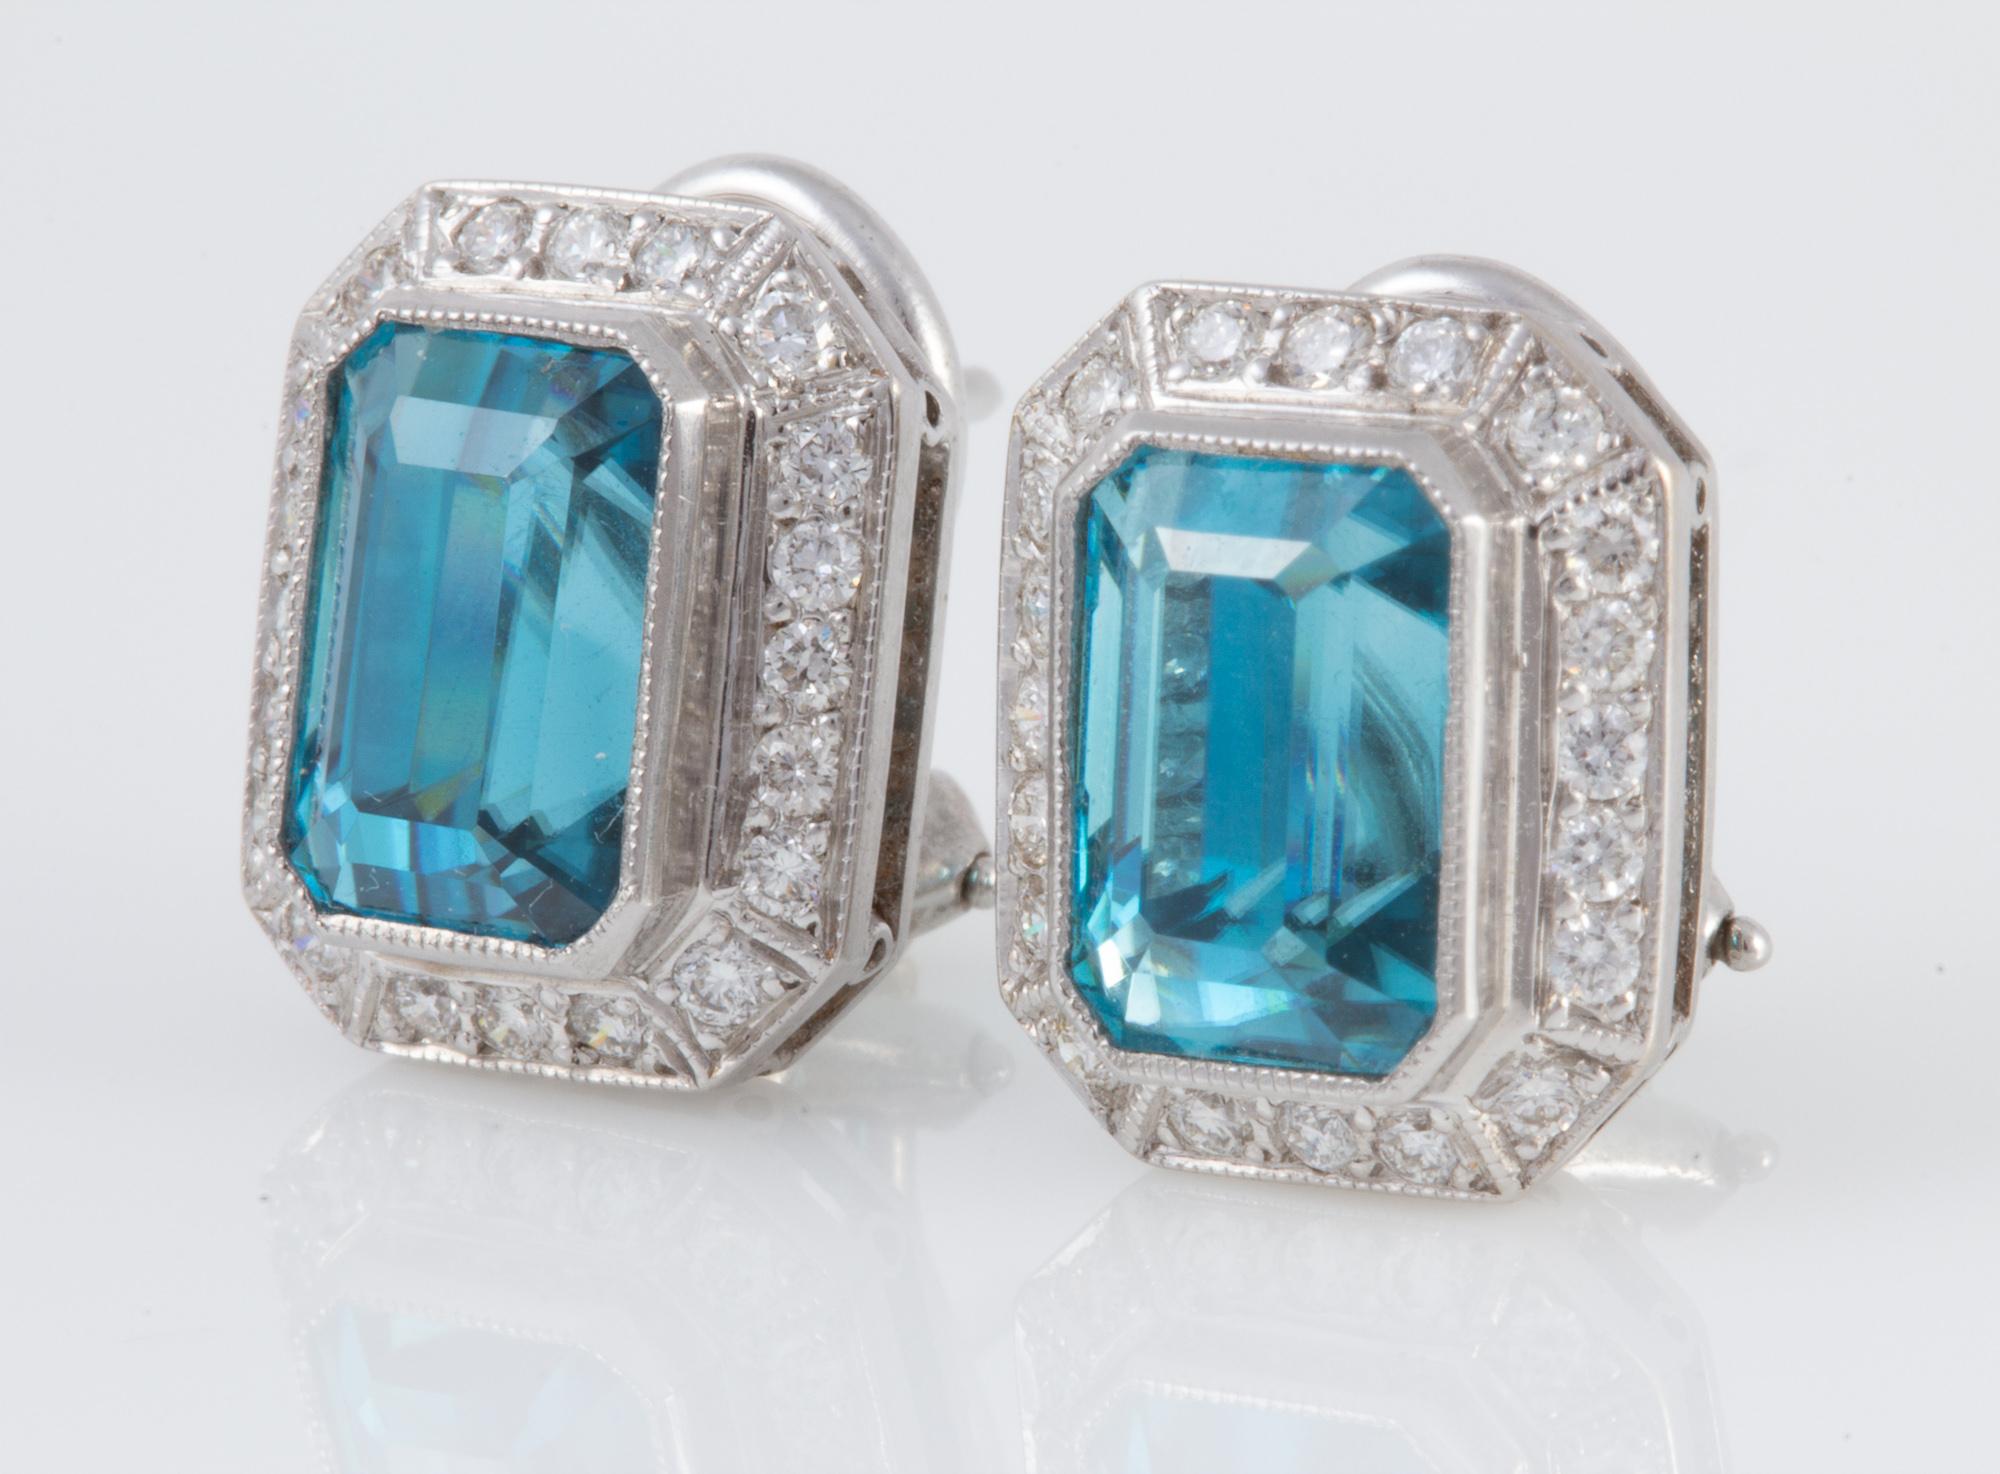 Cambodian Blue Zircon and Diamond Earrings Set in 18 Karat Gold and Platinum For Sale 4